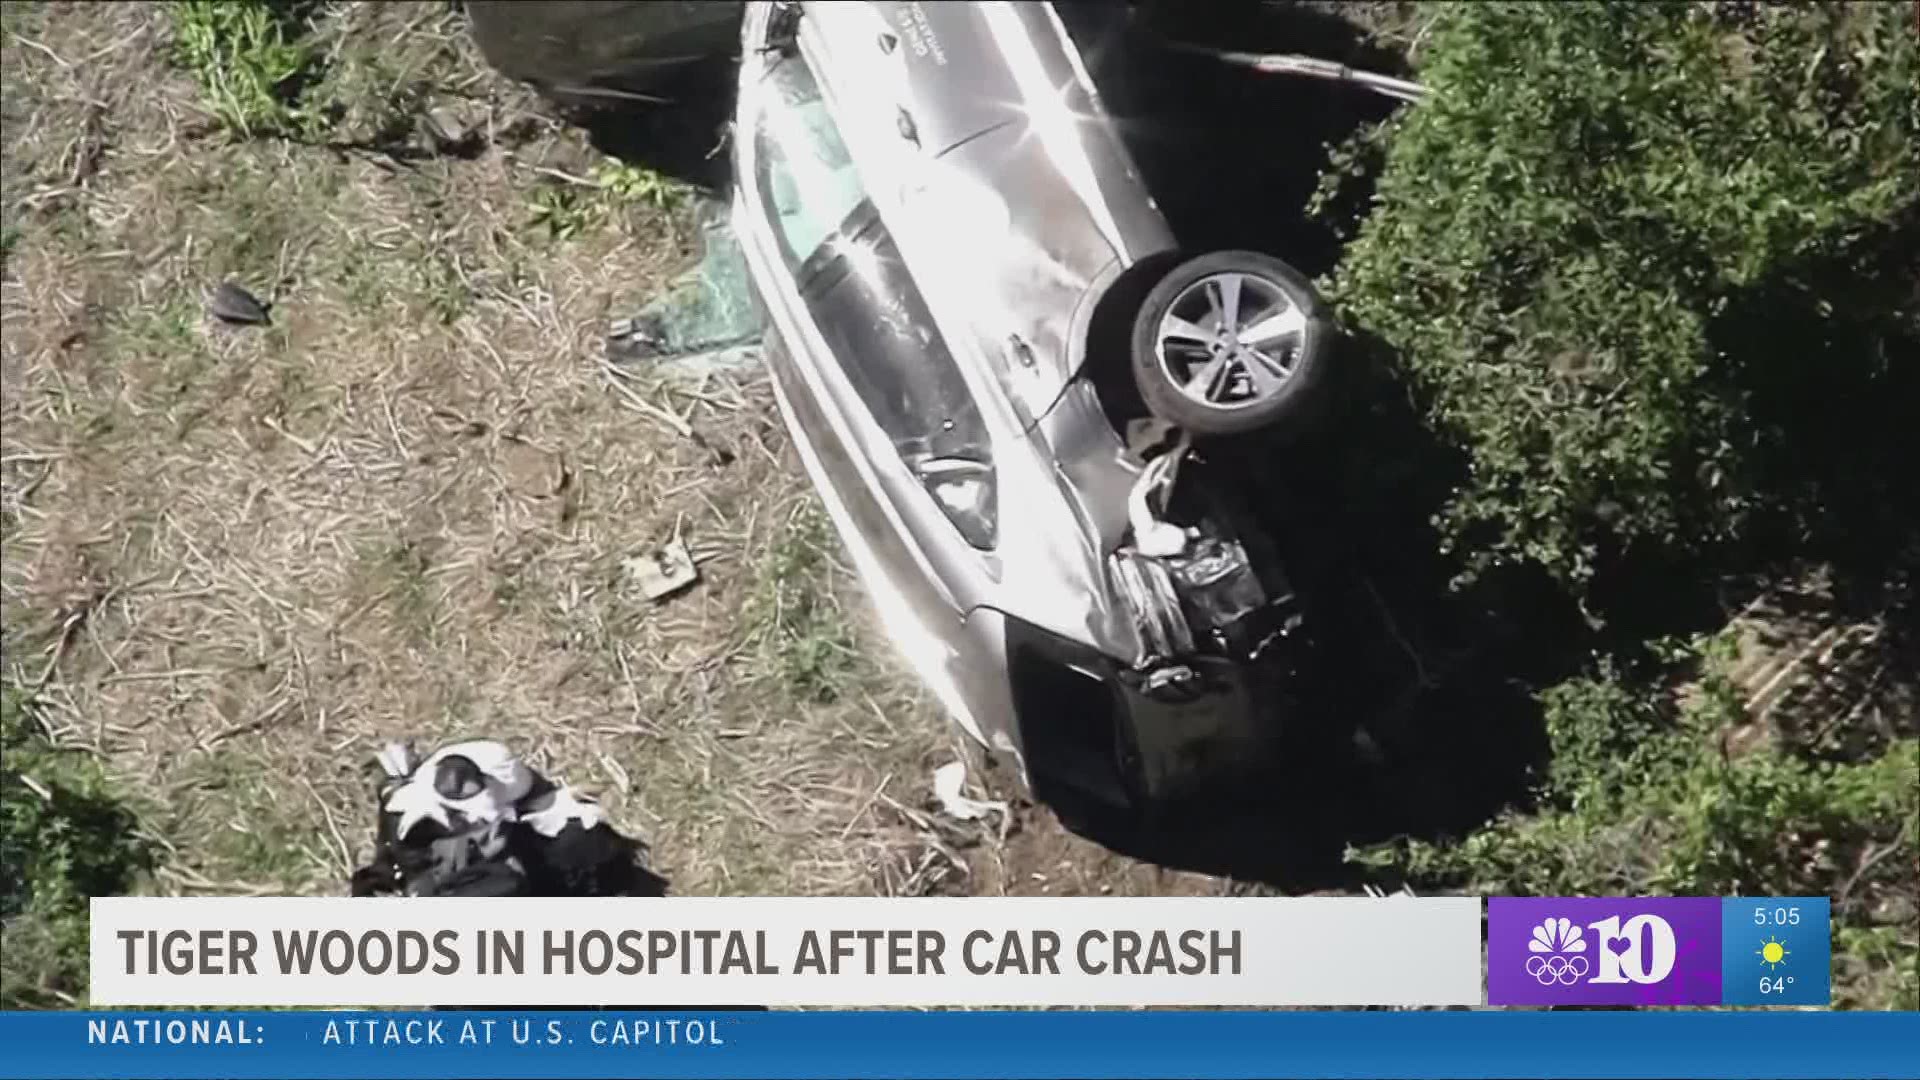 Authorities said that Tiger Woods was in the hospital after a single-car crash near Los Angeles on Tuesday.